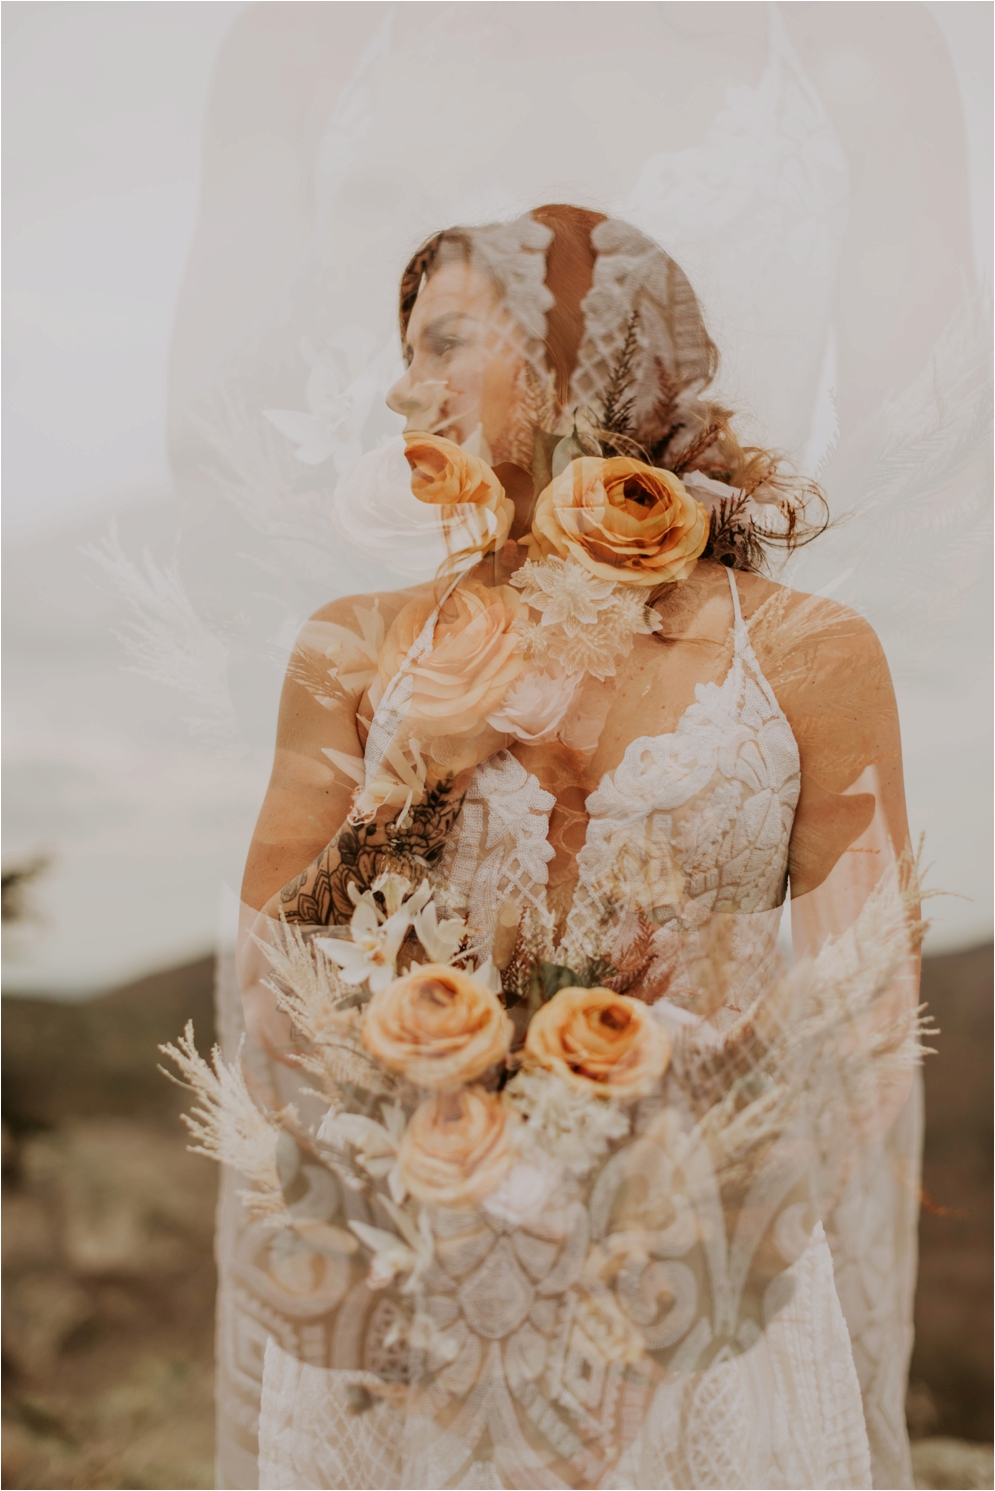 Hanging Rock State Park, Hayley Paige Wedding Dress, Southern Blooms, Carbon Compass Beauty Bar, Wildflower Bridal, Modern Boho Bride, Bohemian Bride, Bridals, See You Clayter, Connection Photography, Asheville Wedding Photographer, Adventurous Wedding Photographer, Charlotte Wedding Photographer, bridal portraits, double exposure